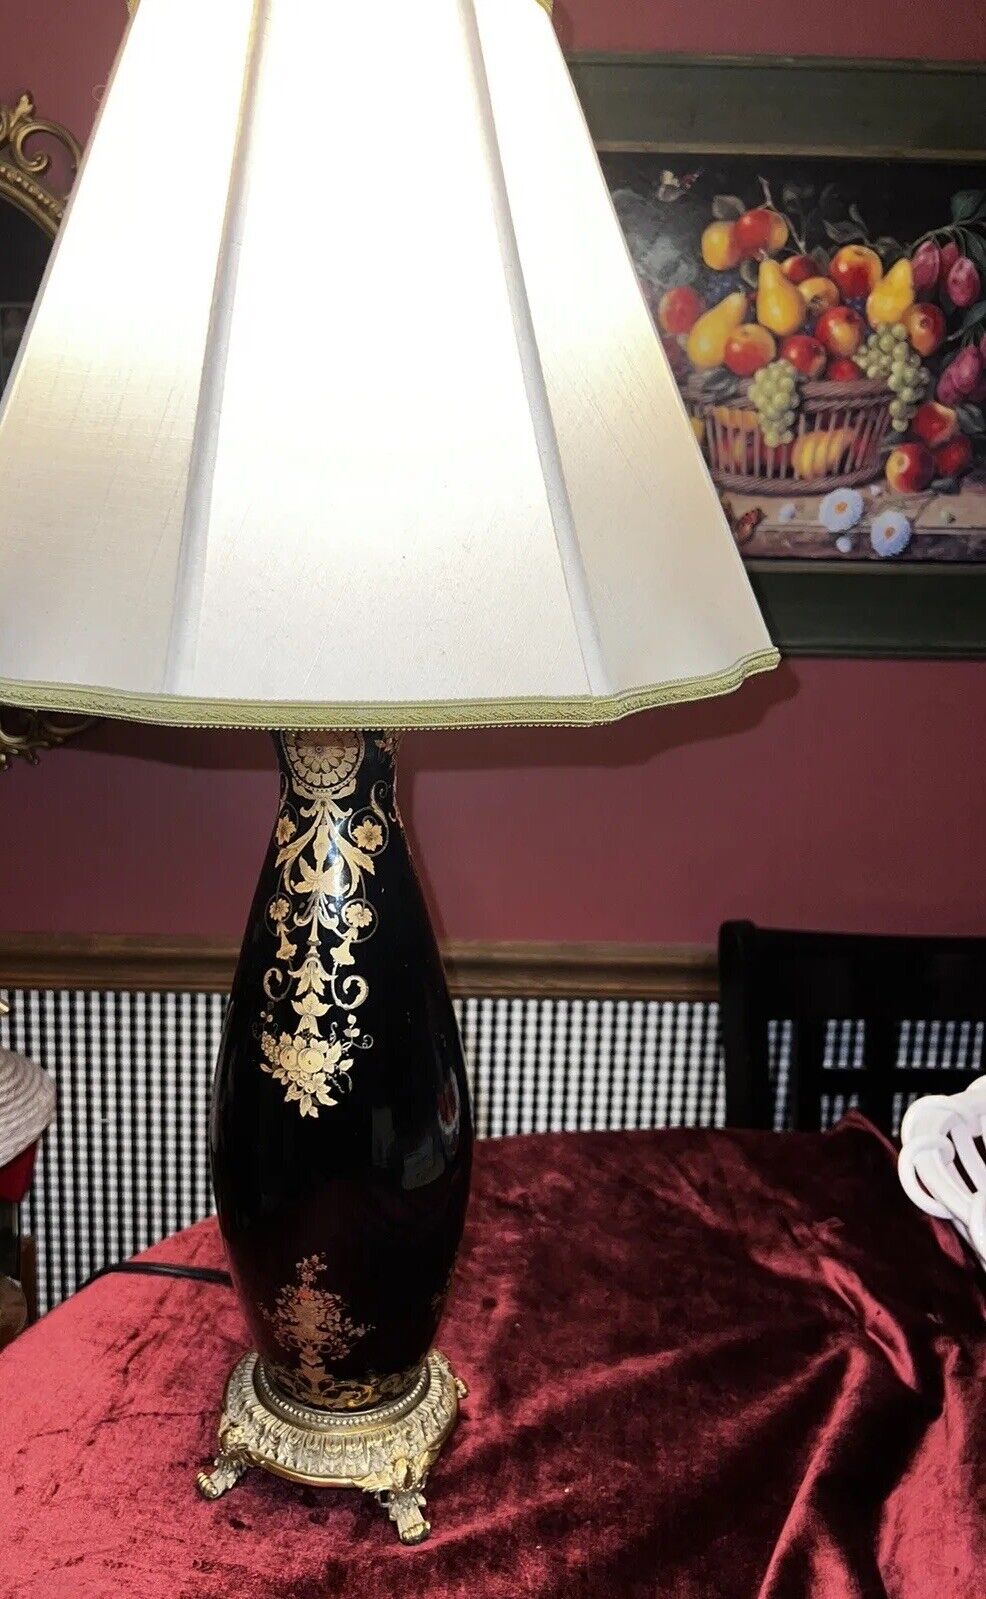 Rare  WILDWOOD TABLE LAMP Chinese Vintage Black Mirrored & Gold￼ Exquisite 